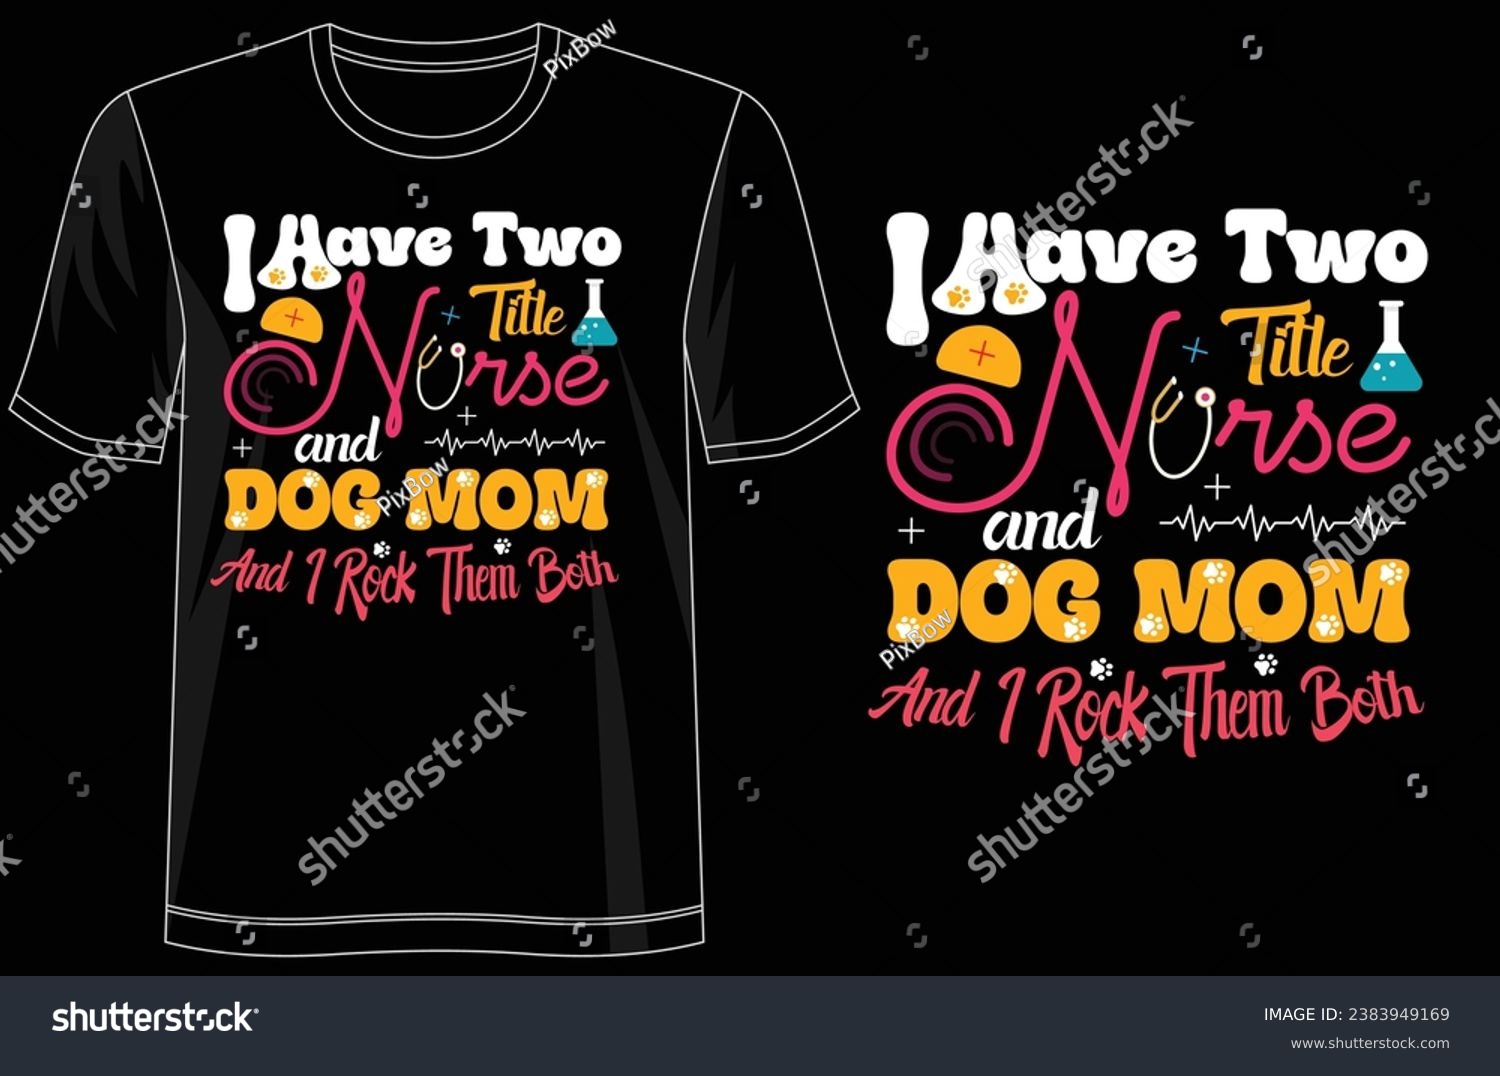 SVG of Double Title Tee - 'I Have Two Title Nurse and Dog Mom and I Rock Them Both' Cool T-Shirt Design, For print, illustration, typography, Premium Quality Wear svg